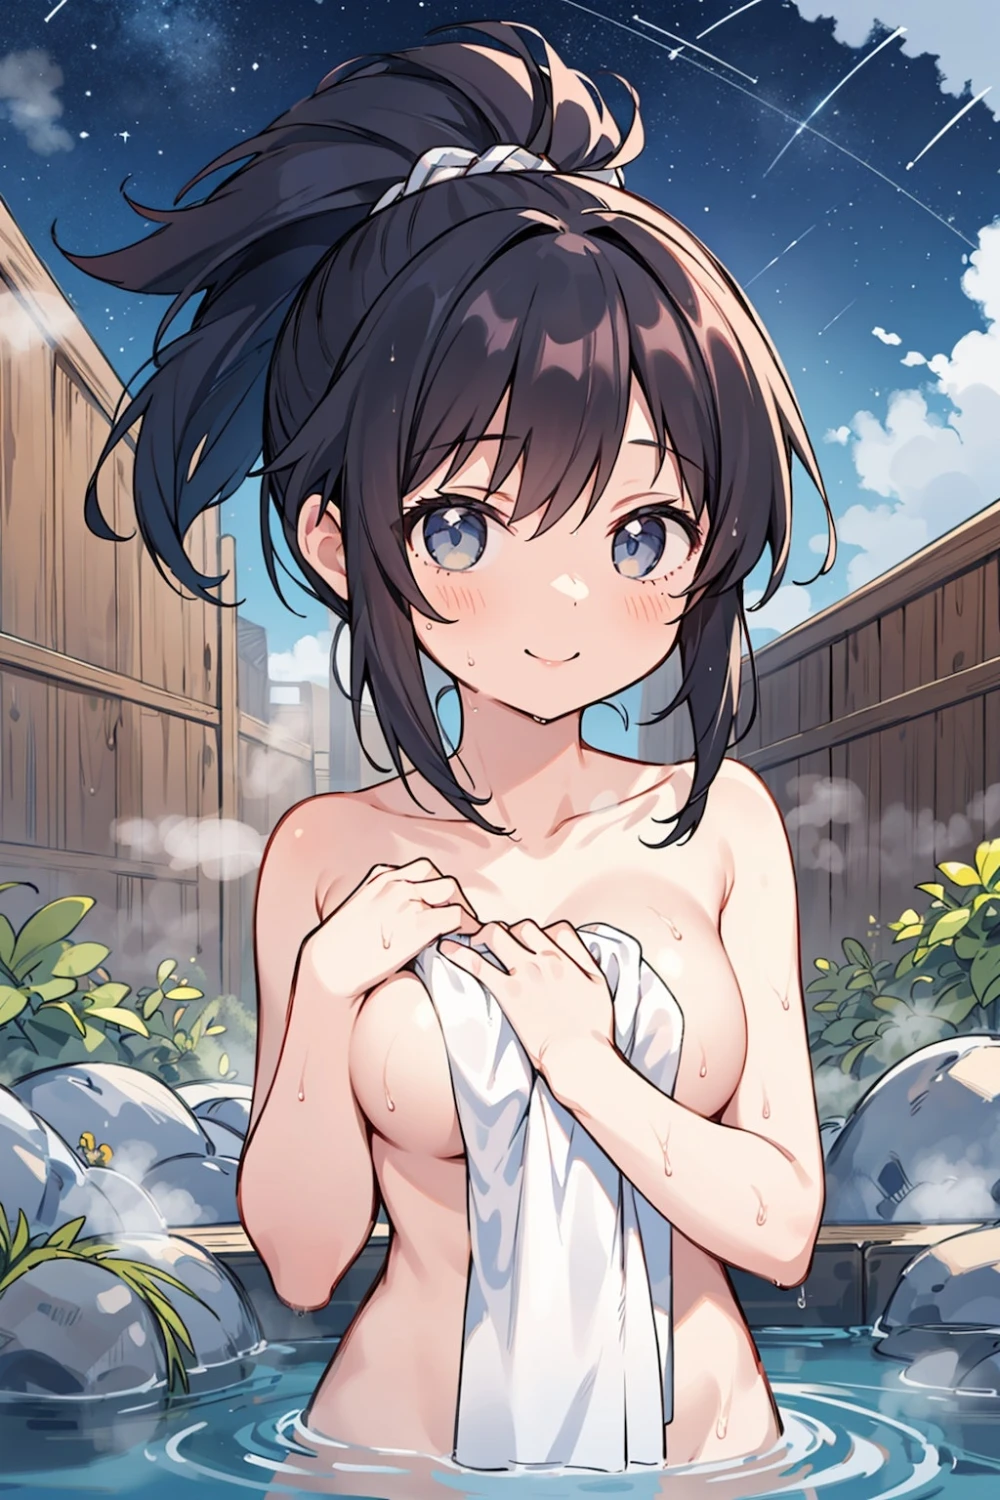 onsen-anime-style-all-ages-44